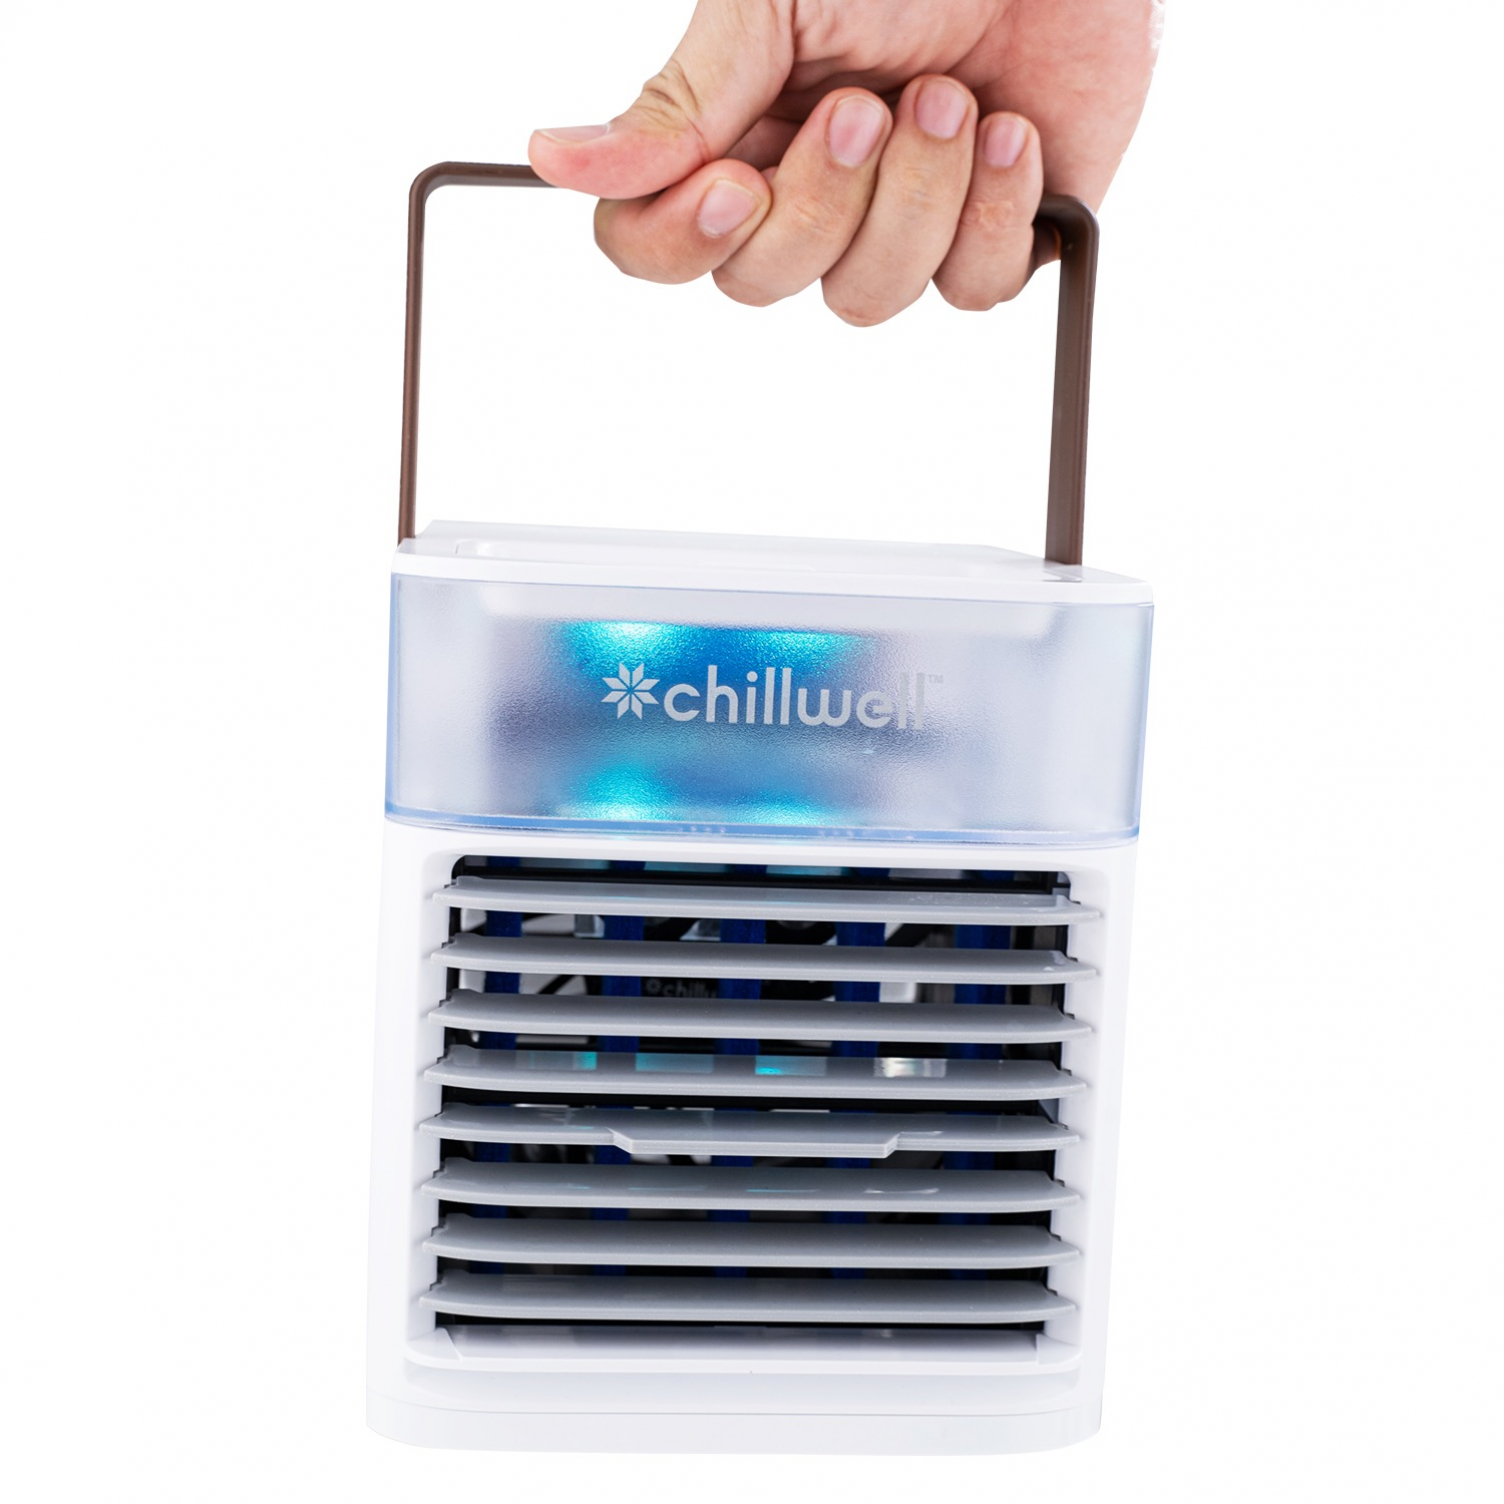 Does The Chillwell AC Cooler Work